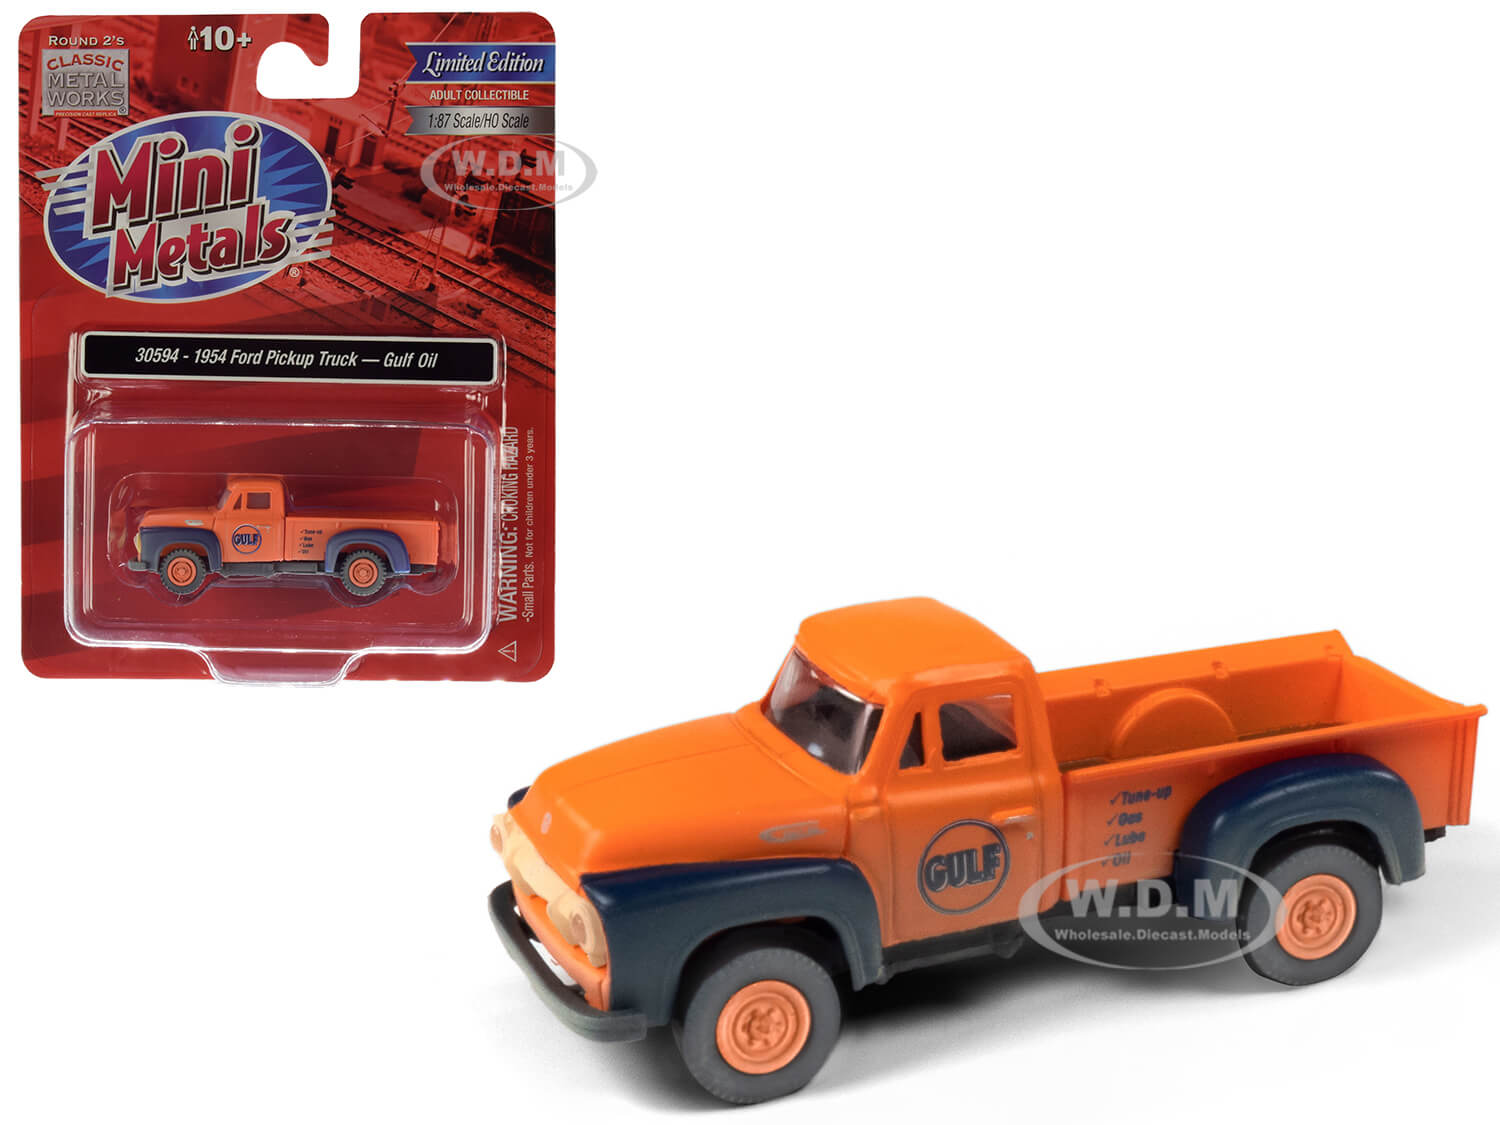 1954 Ford Pickup Truck "gulf Oil" Orange (dirty/weathered) 1/87 (ho) Scale Model Car By Classic Metal Works